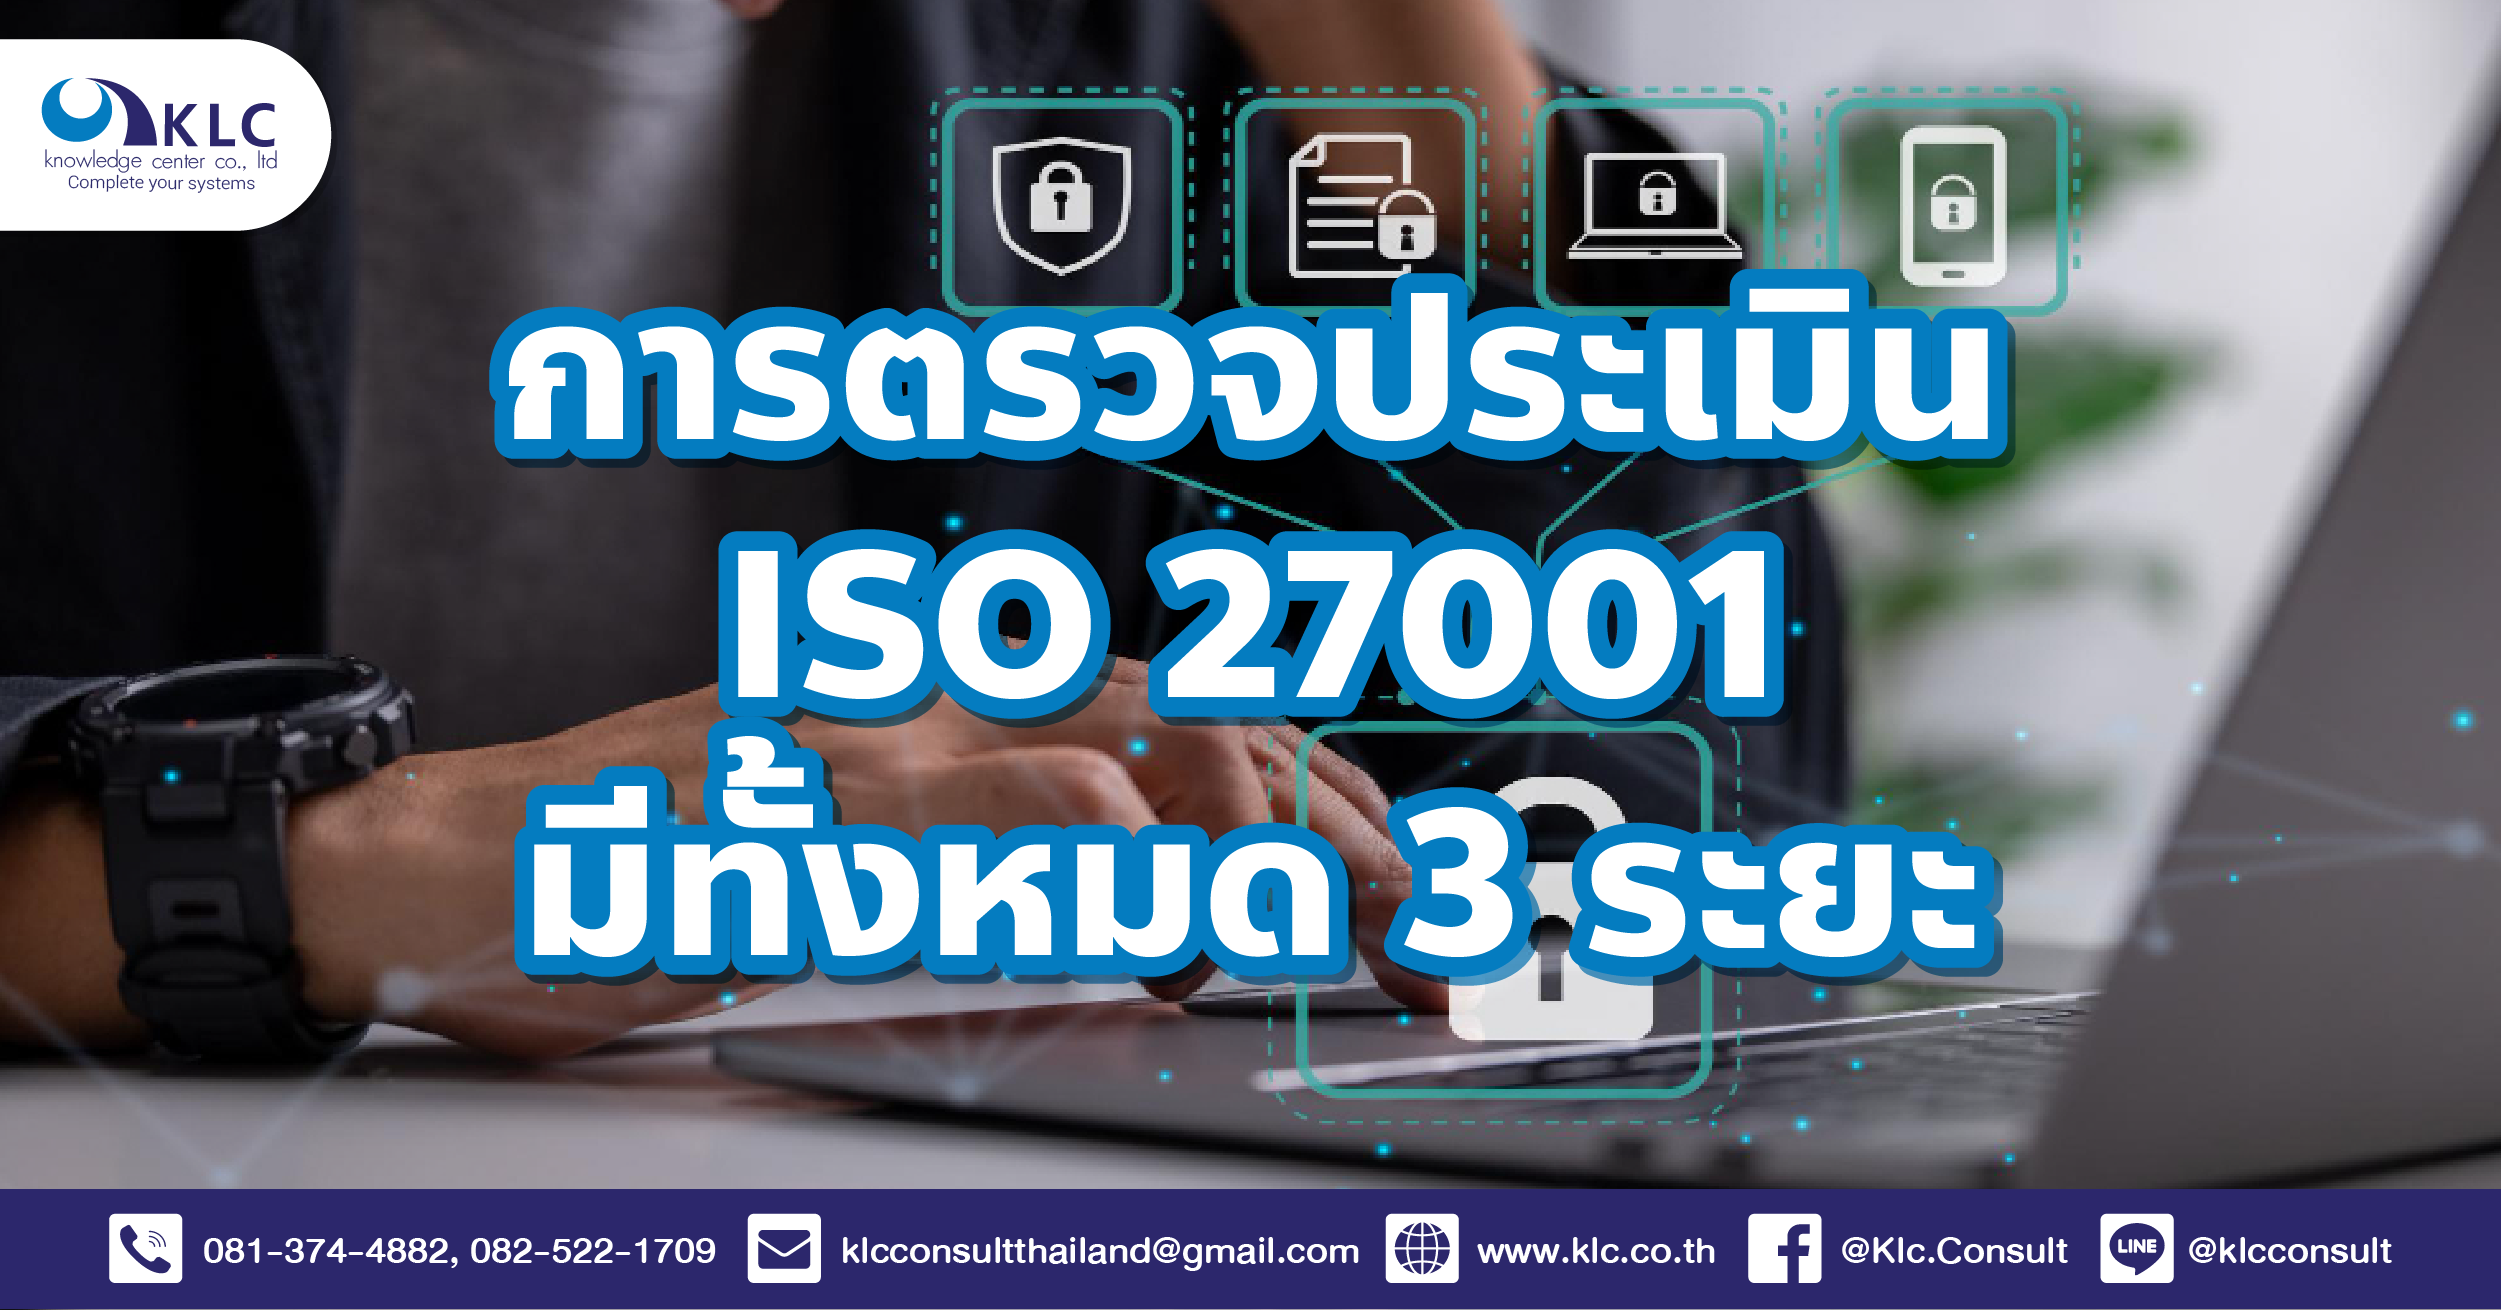 046_The ISO 27001 audit has 3 phases-01